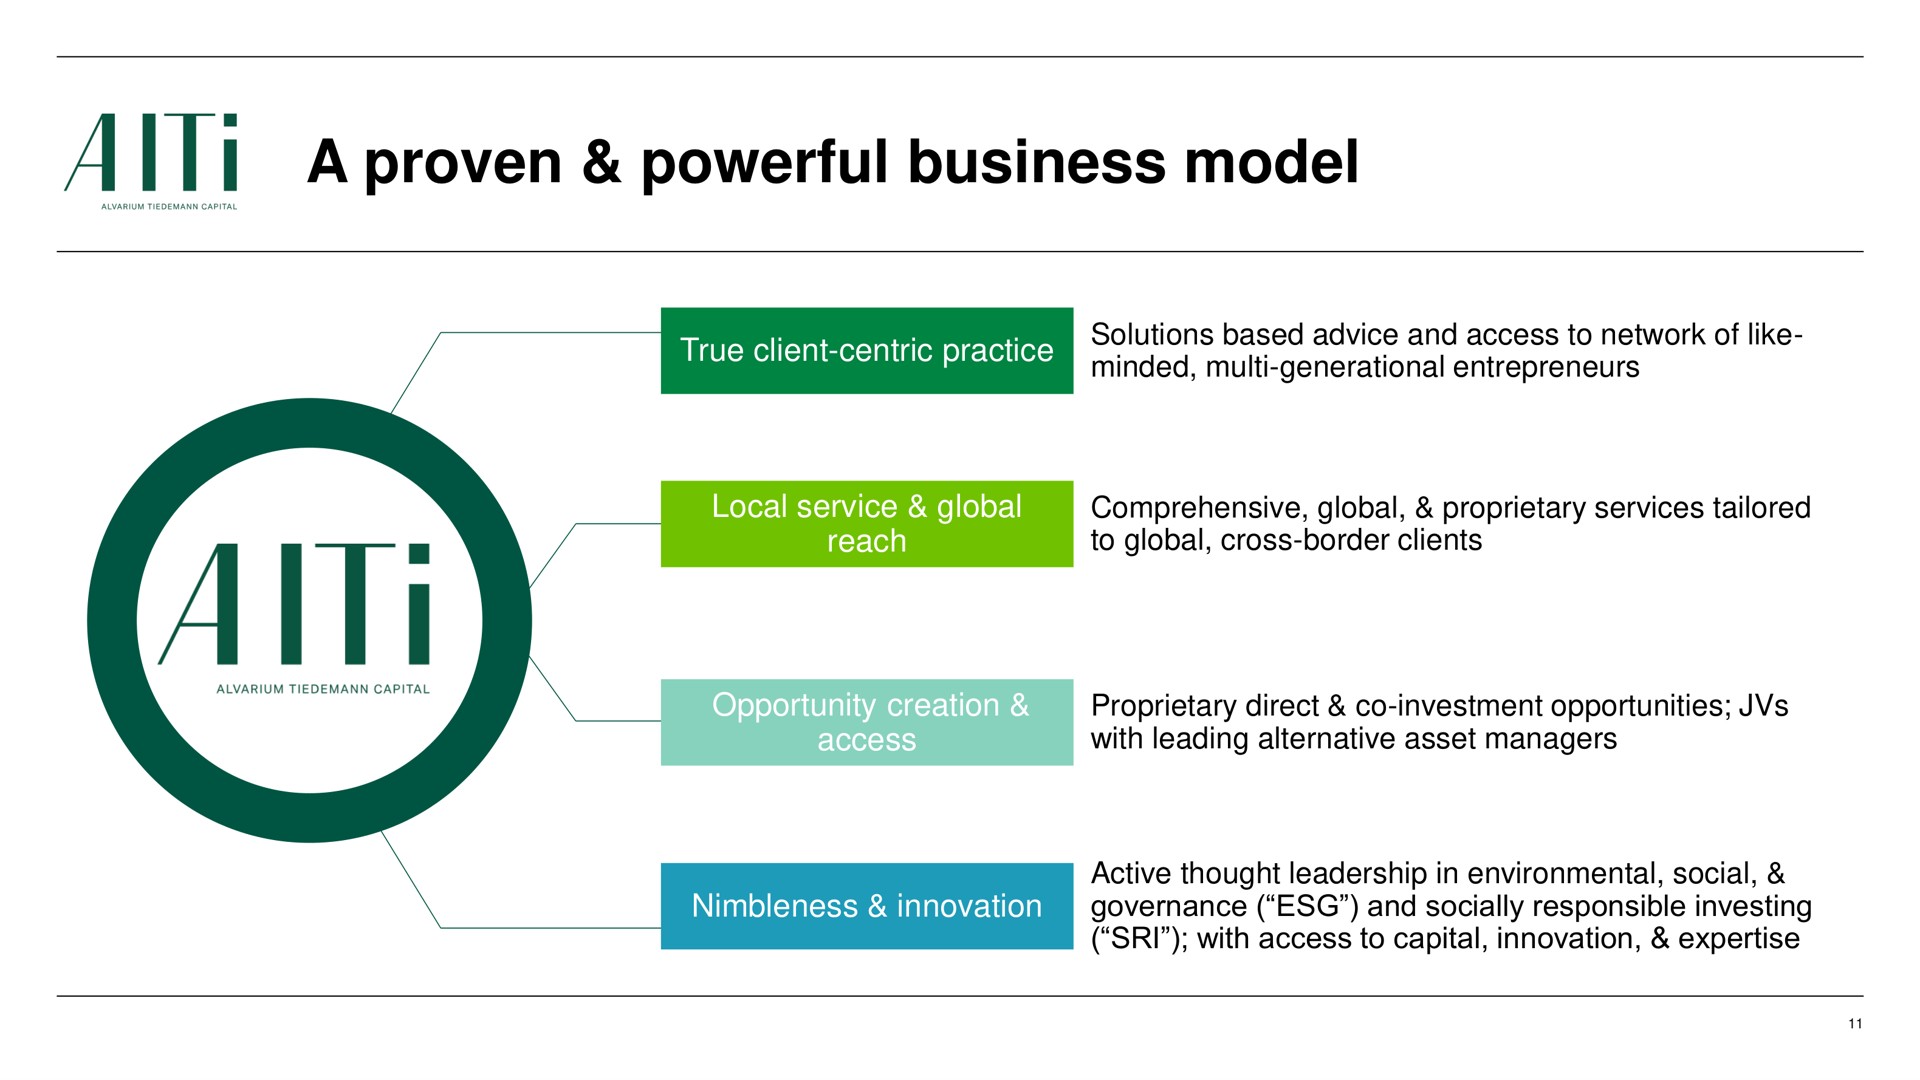 a proven powerful business model | AlTi